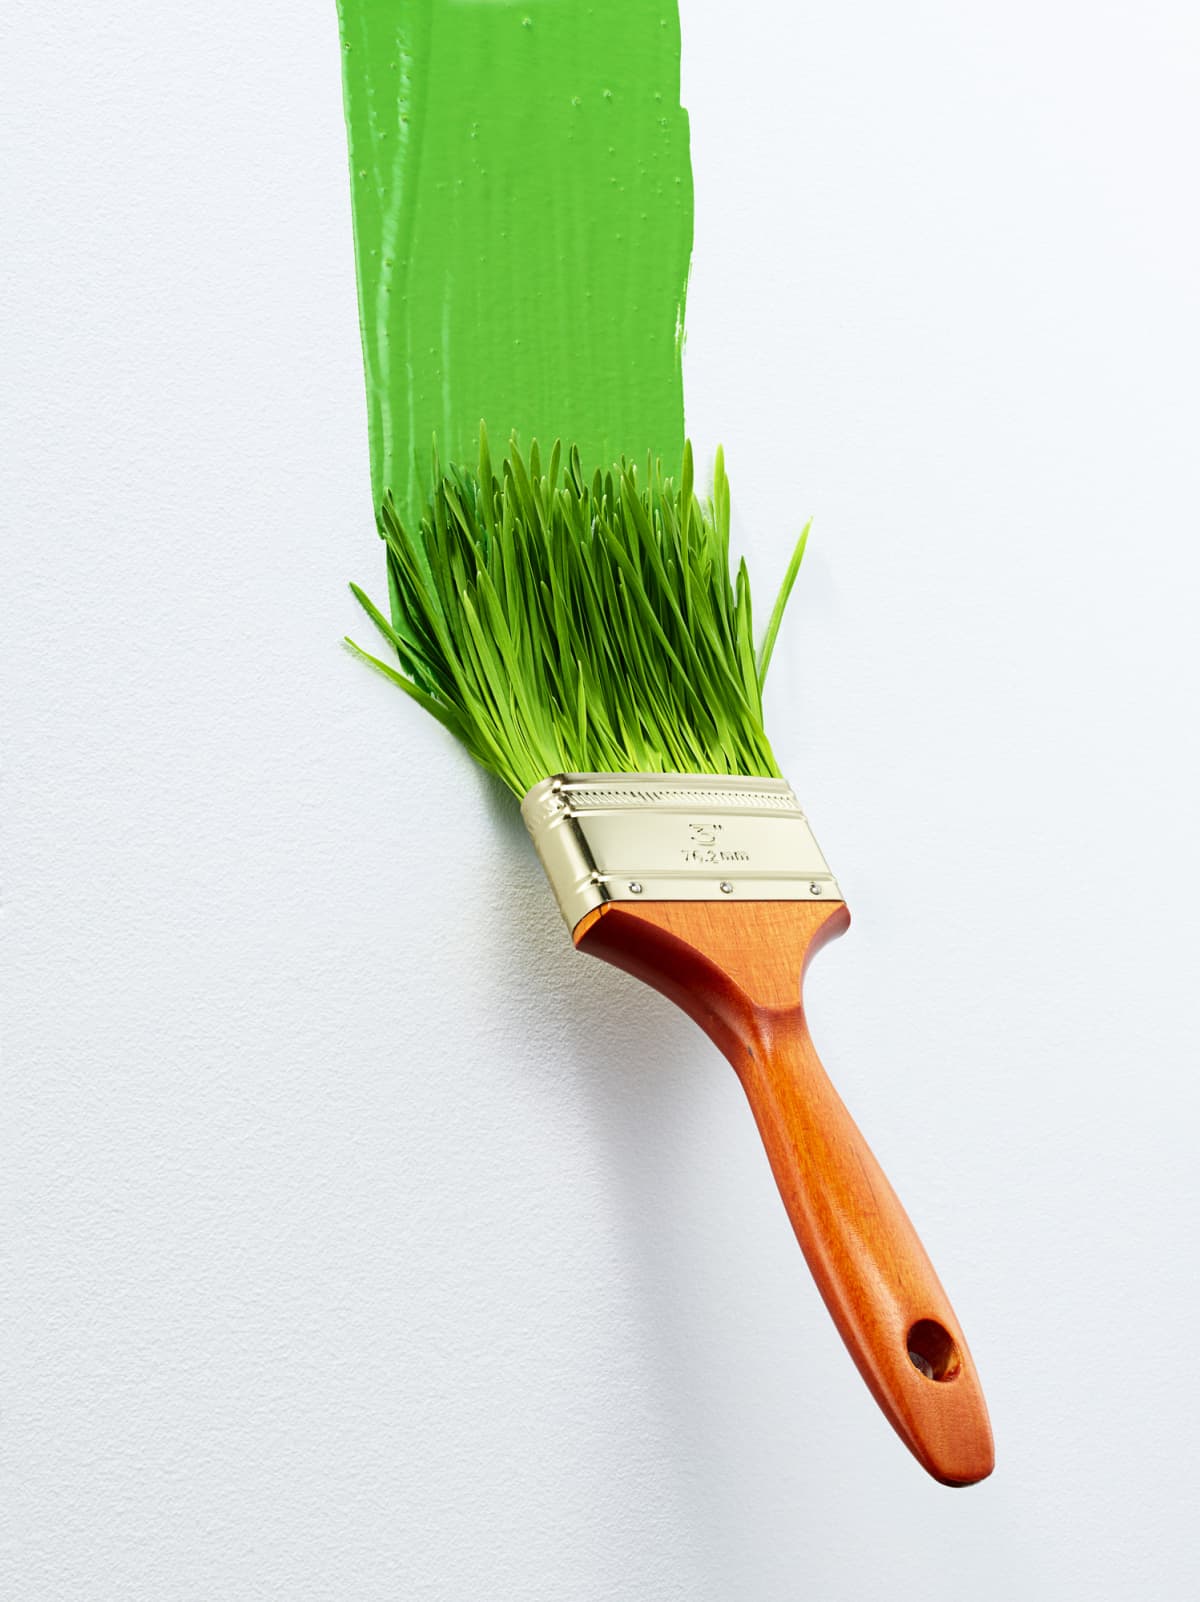 A paintbrush painting green